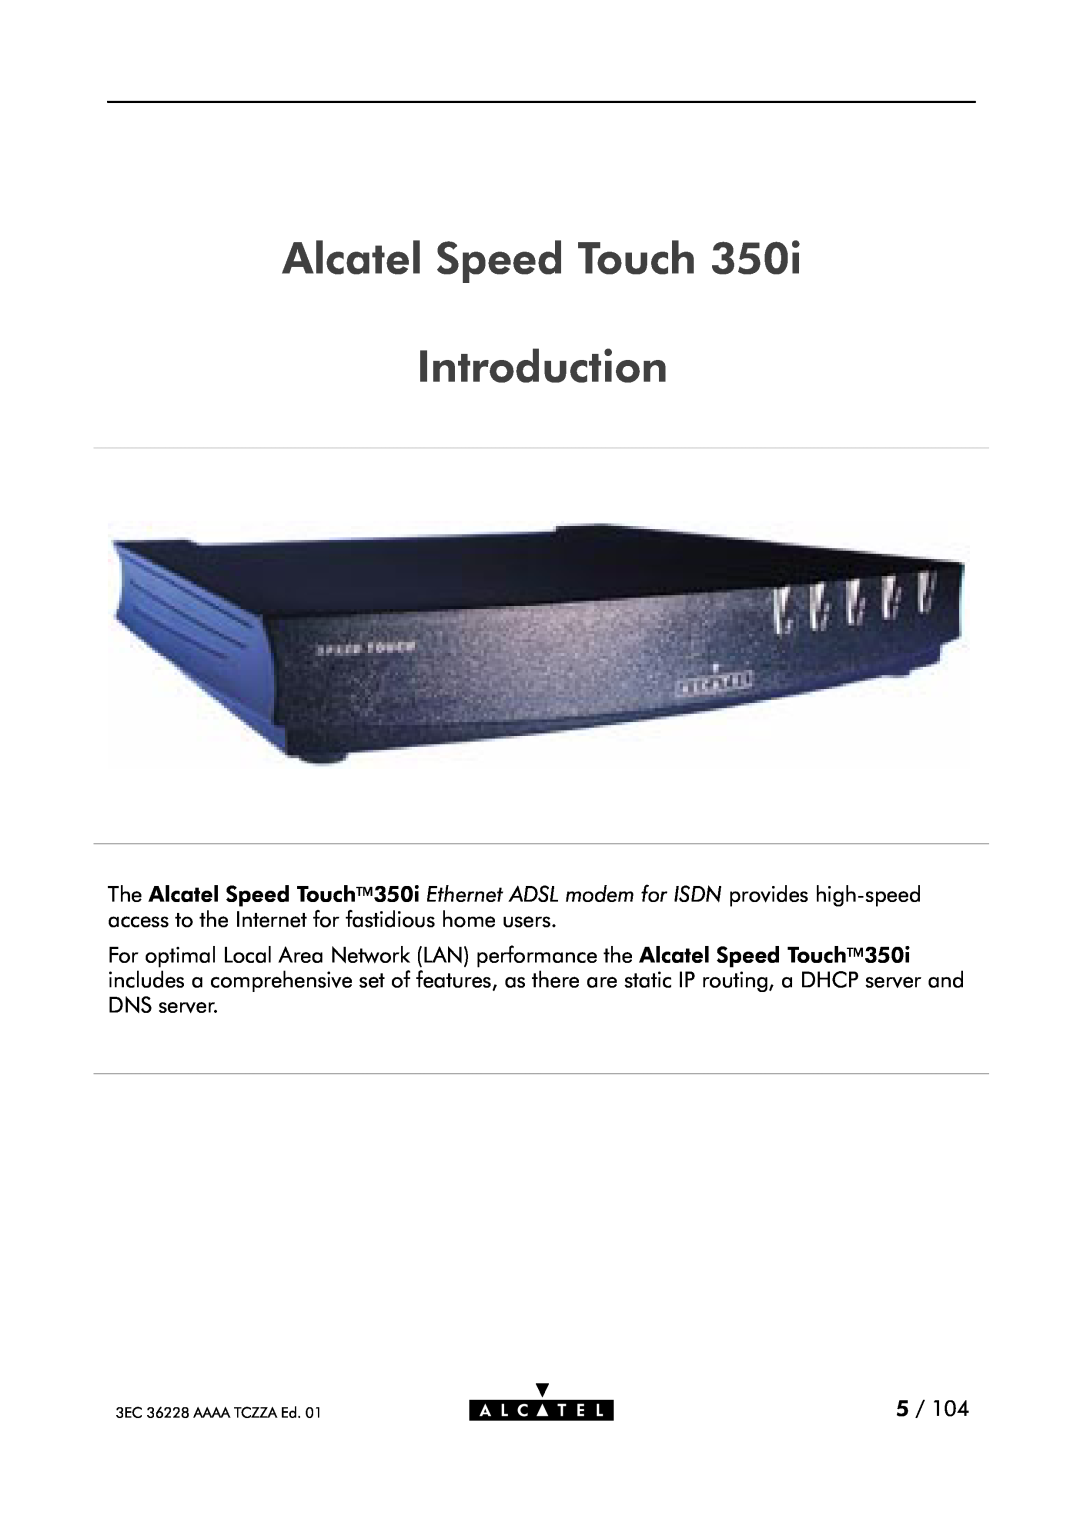 Alcatel Carrier Internetworking Solutions 350I manual Alcatel Speed Touch Introduction 